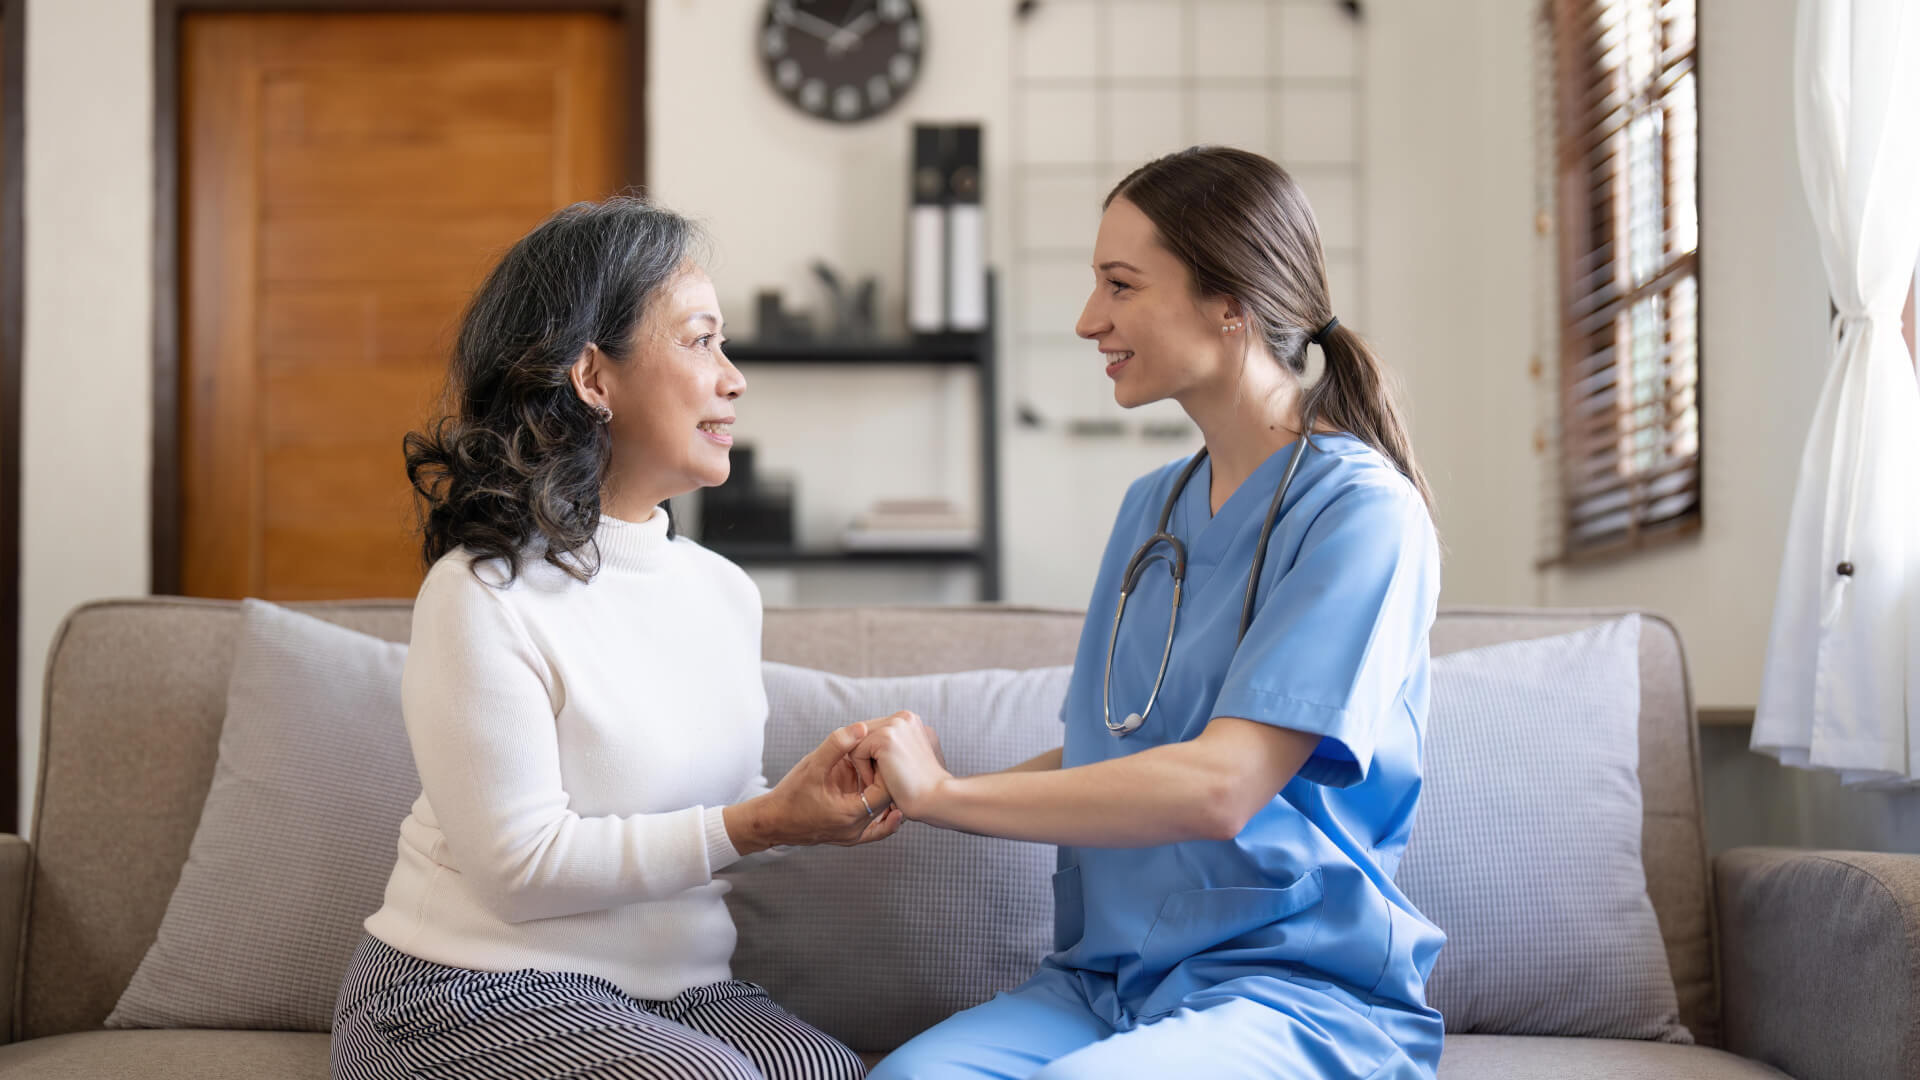 A healthcare professional in blue scrubs holding hands with an elderly patient, showing a comforting interaction in a home setting.